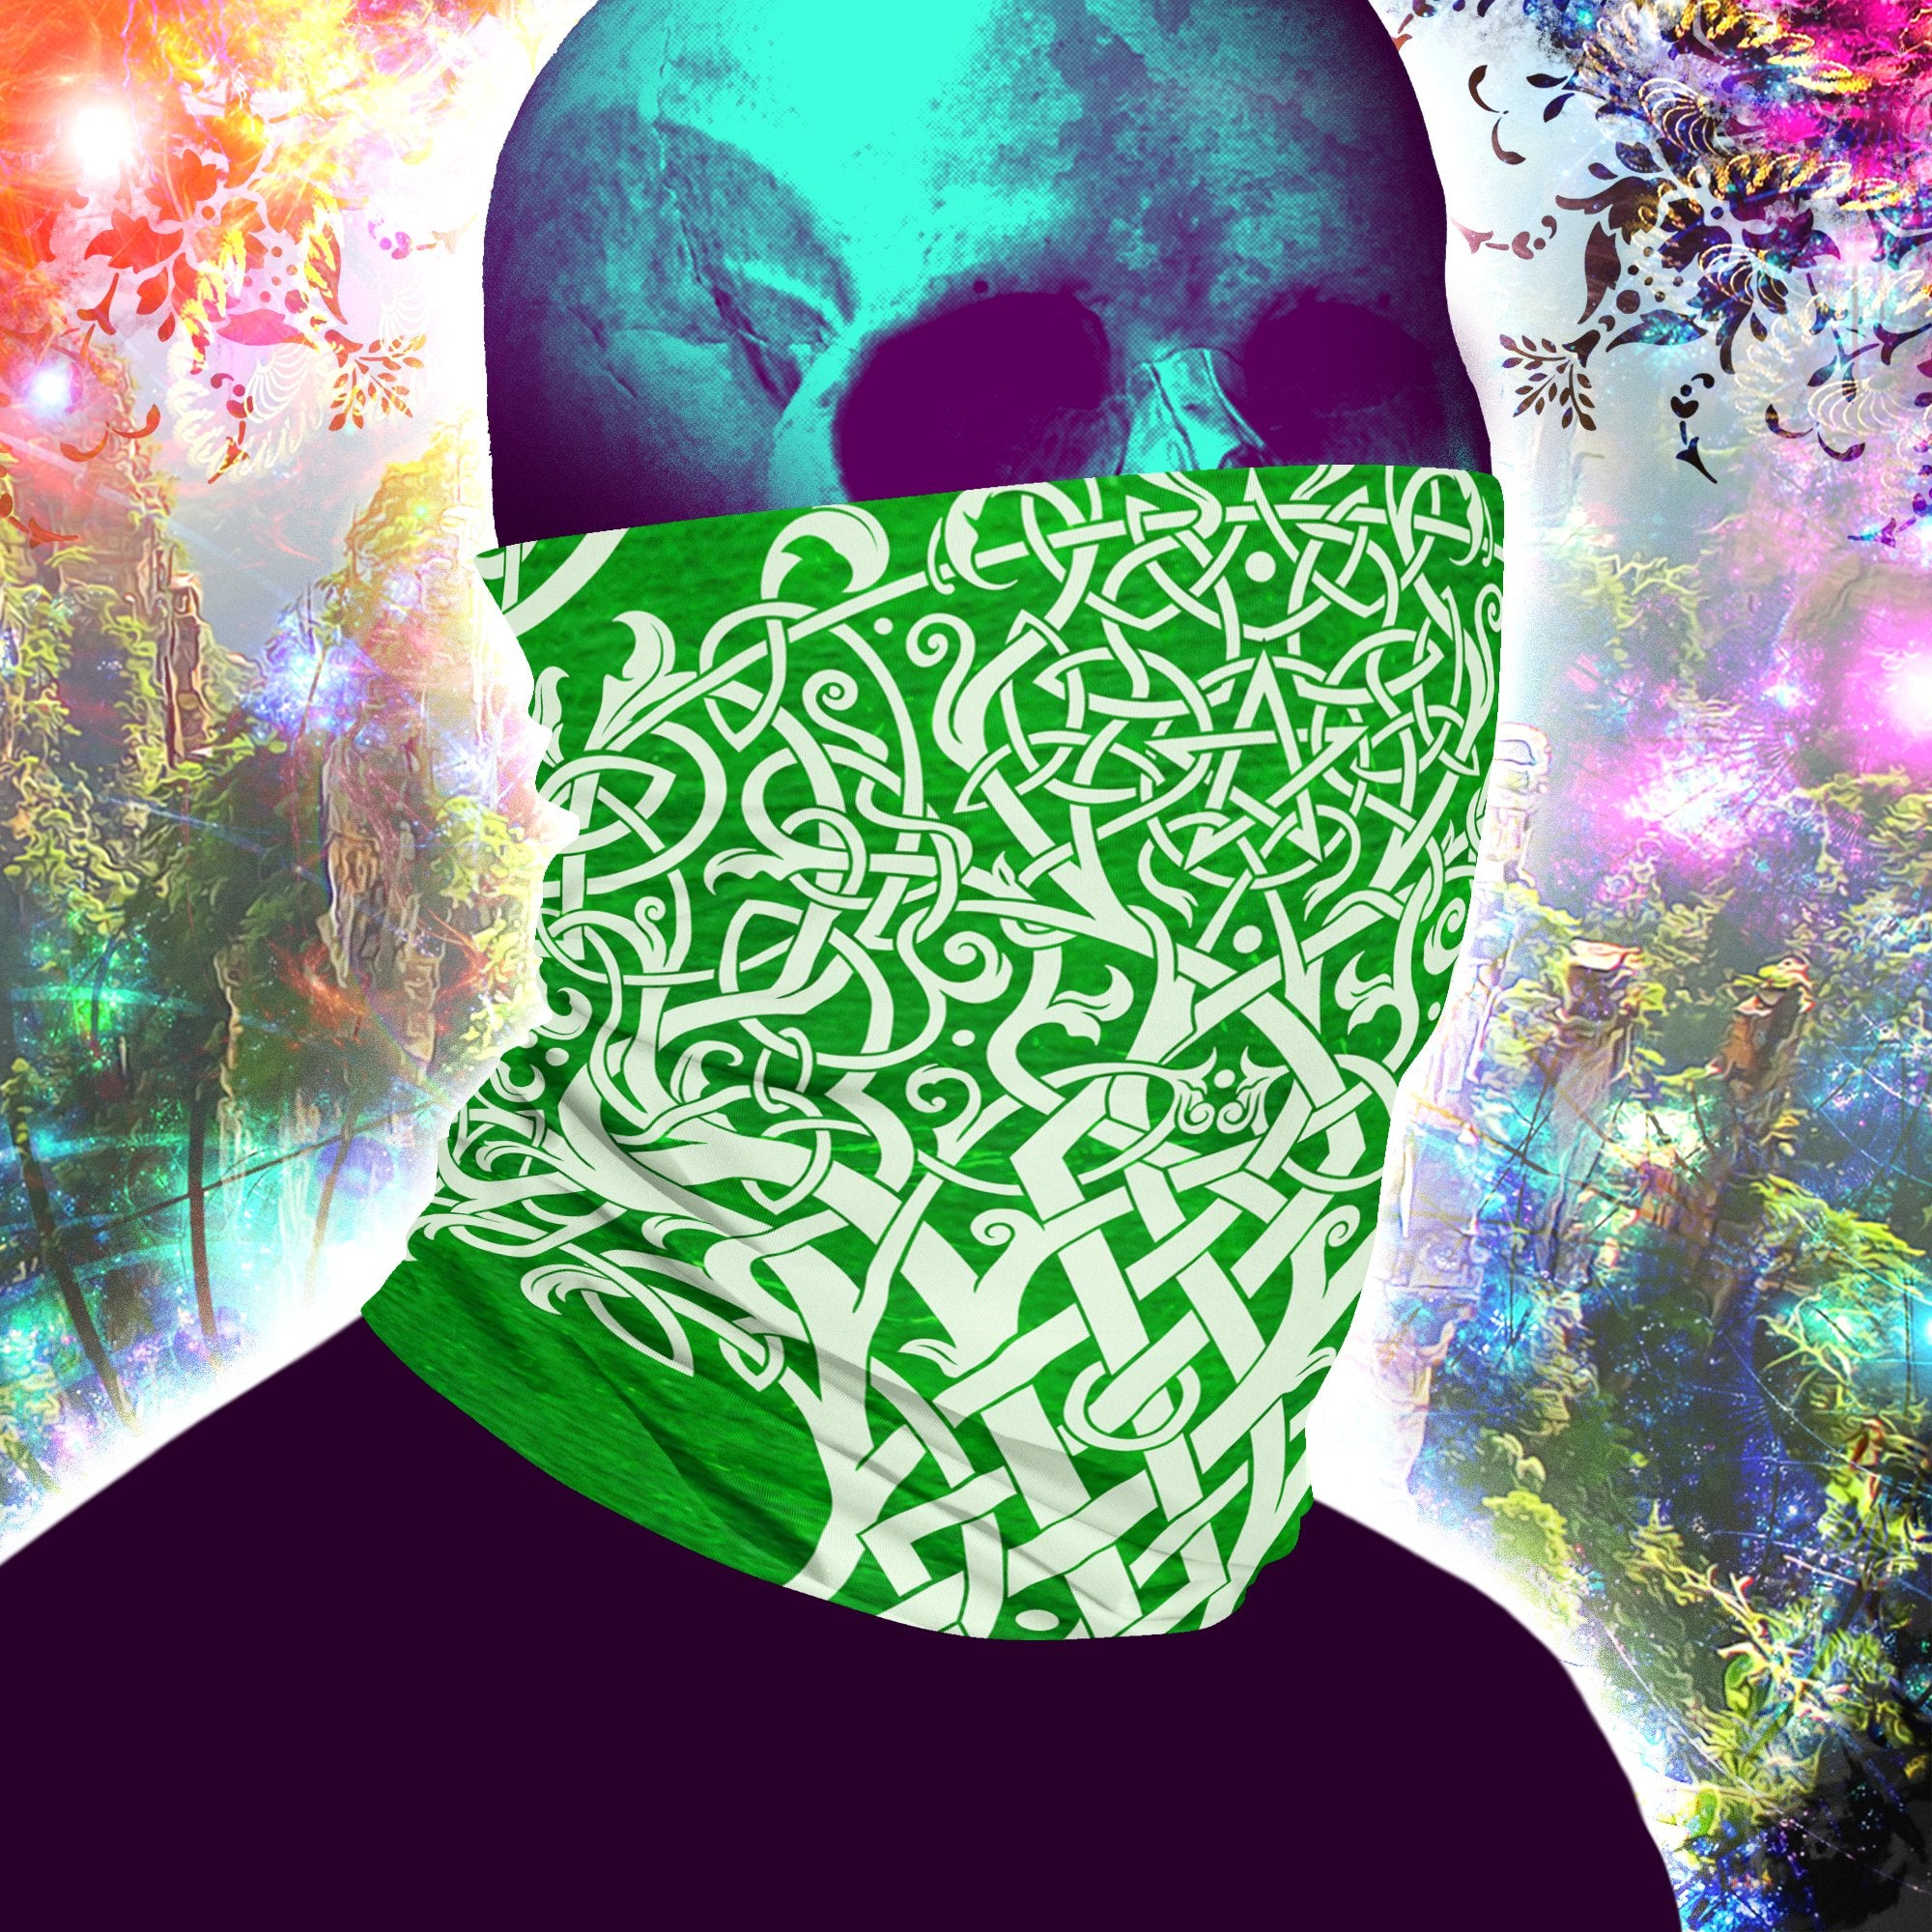 Colorful Tree of Life Neck Gaiter, Face Mask, Printed Head Covering, Rave Outfit, Celtic Pagan Outfit, Witchy - 7 Colors - Abysm Internal